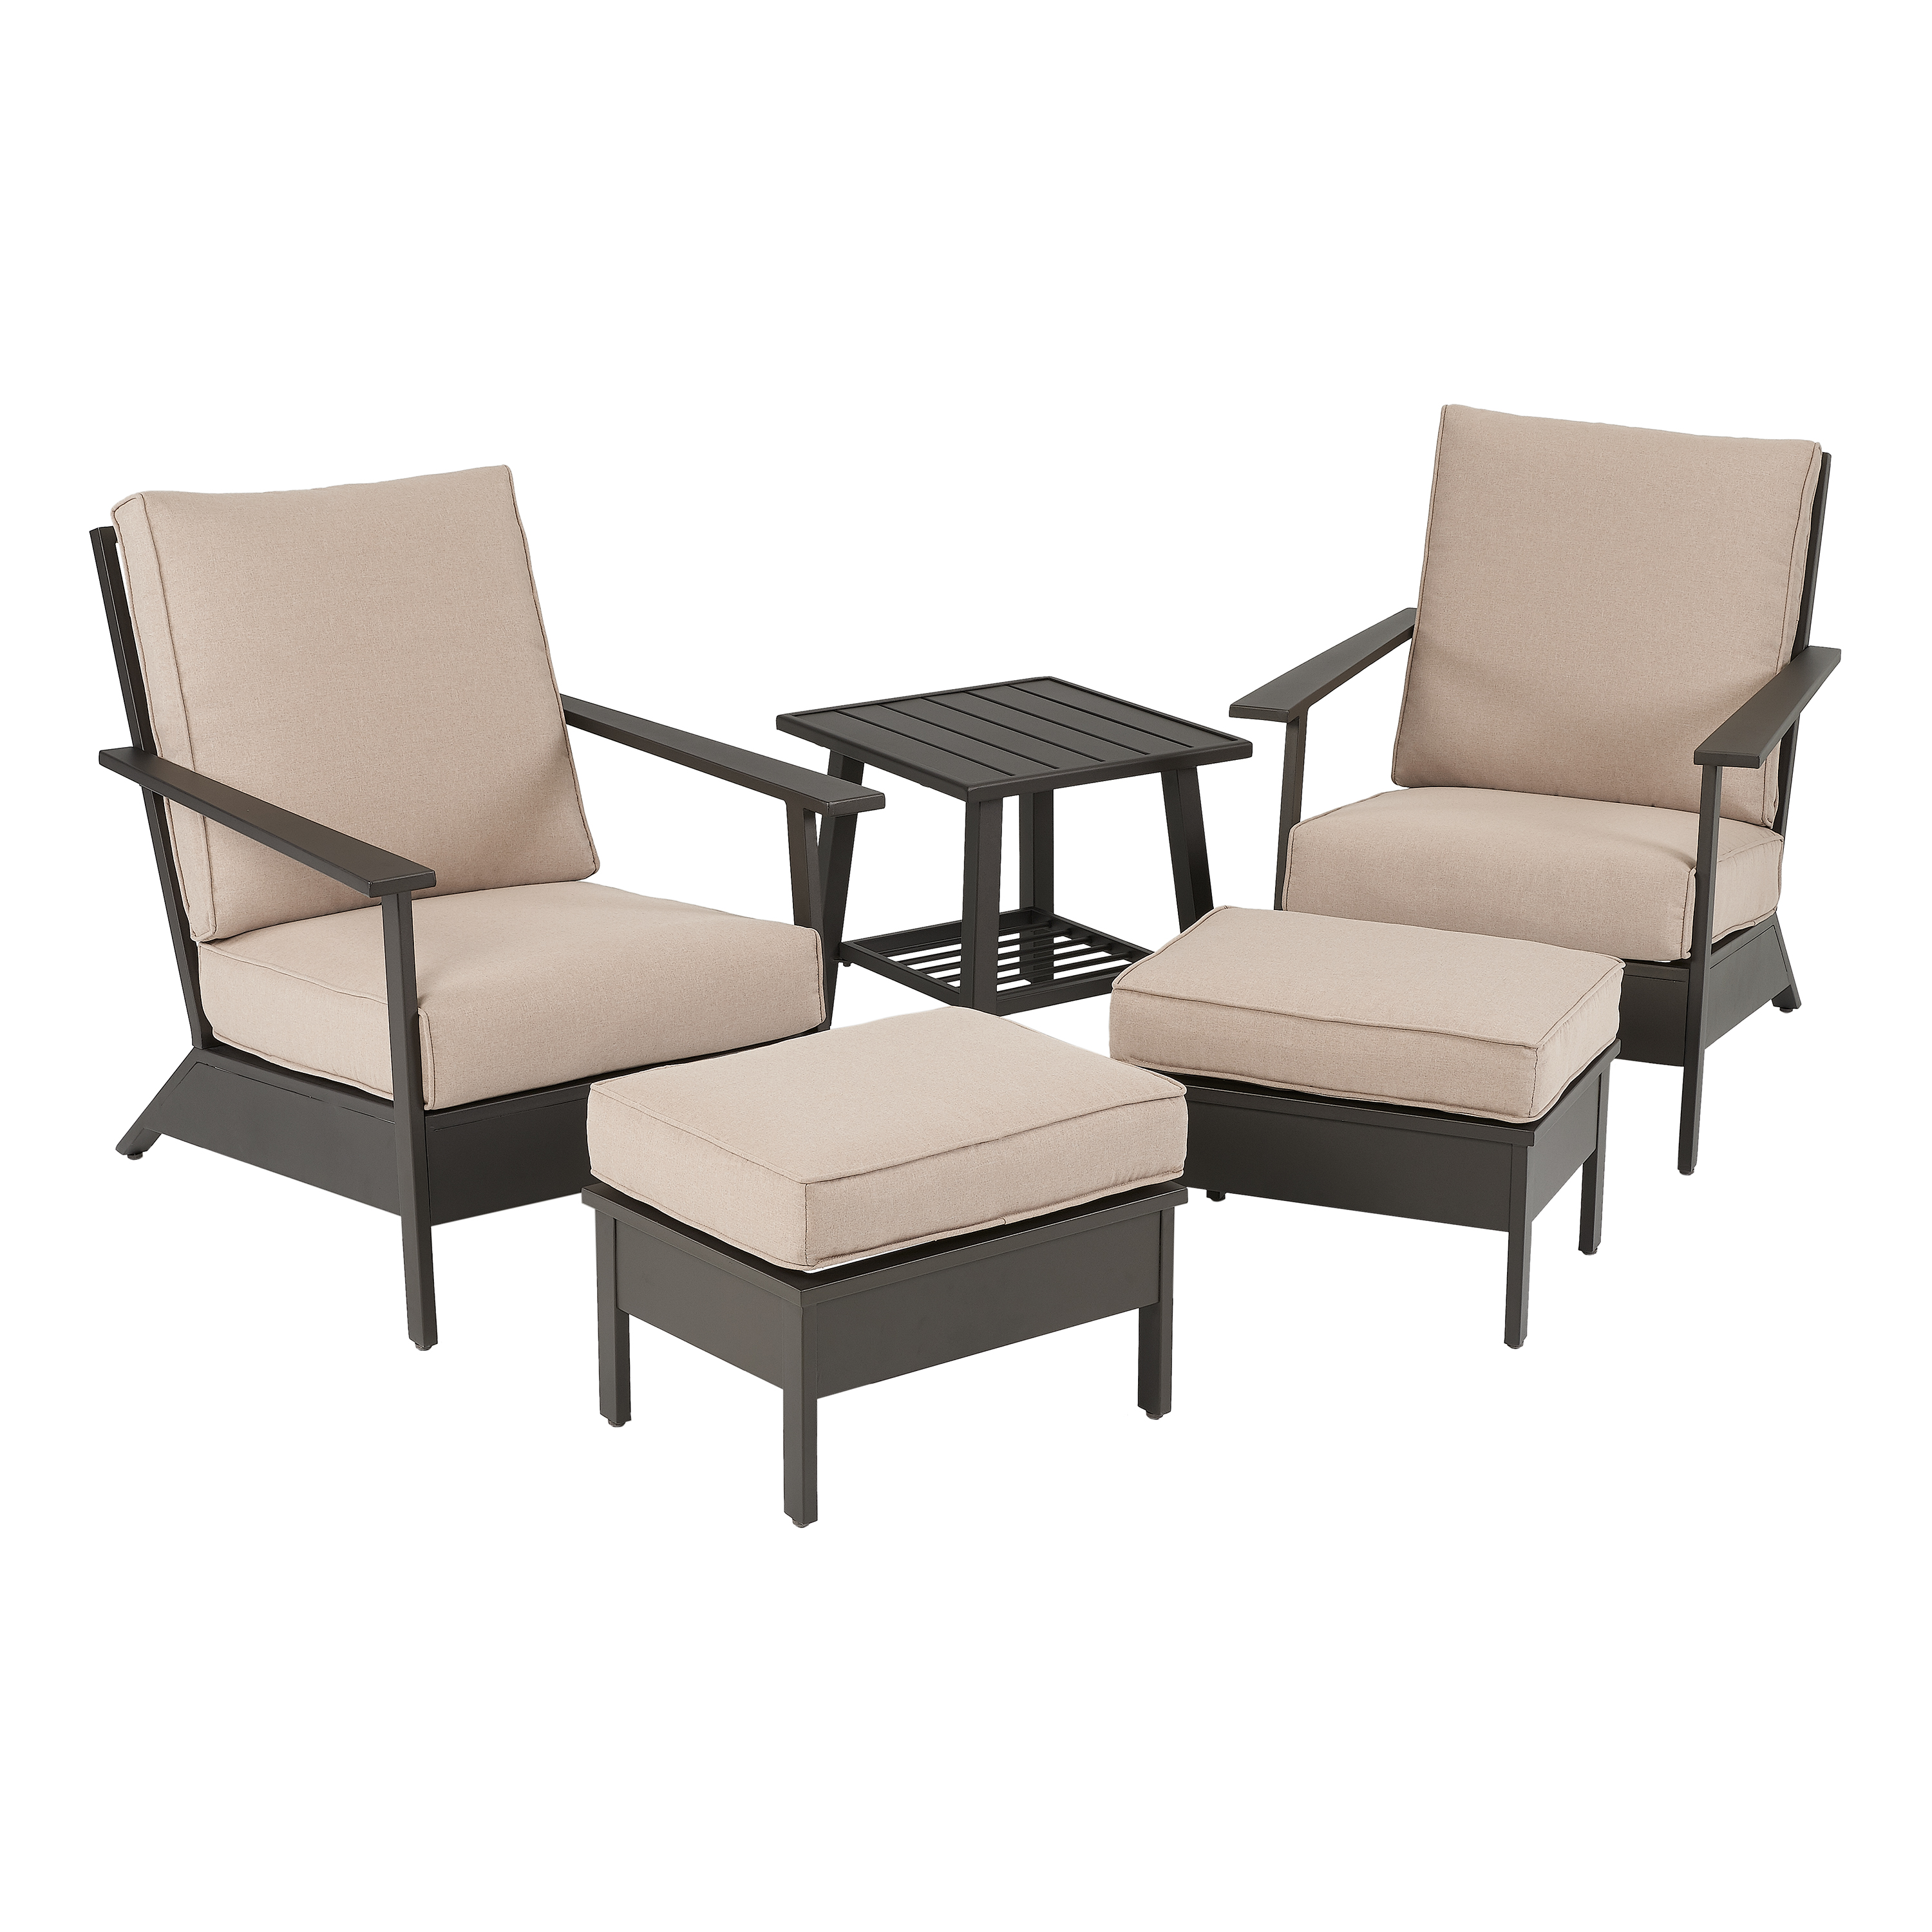 Better Homes & Gardens Emeryville 5 - Piece Chat Set with Beige Cushions - image 1 of 11